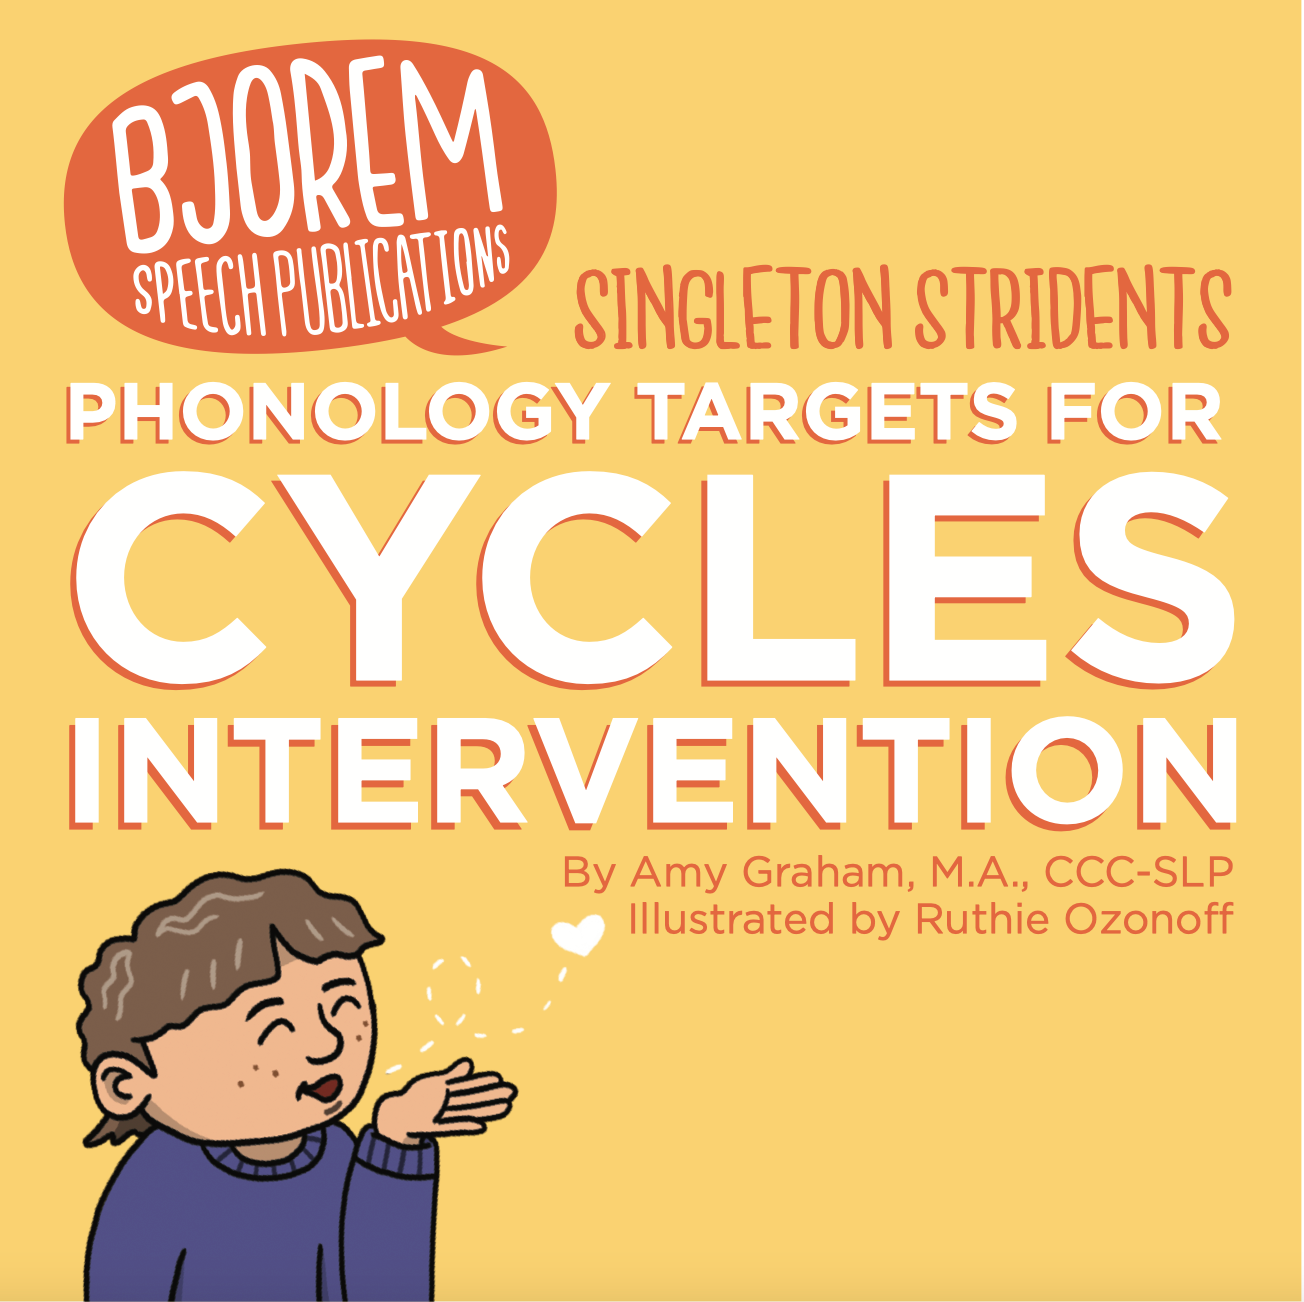 [title]Cycles Intervention: Singleton Stridents Phonology Targets